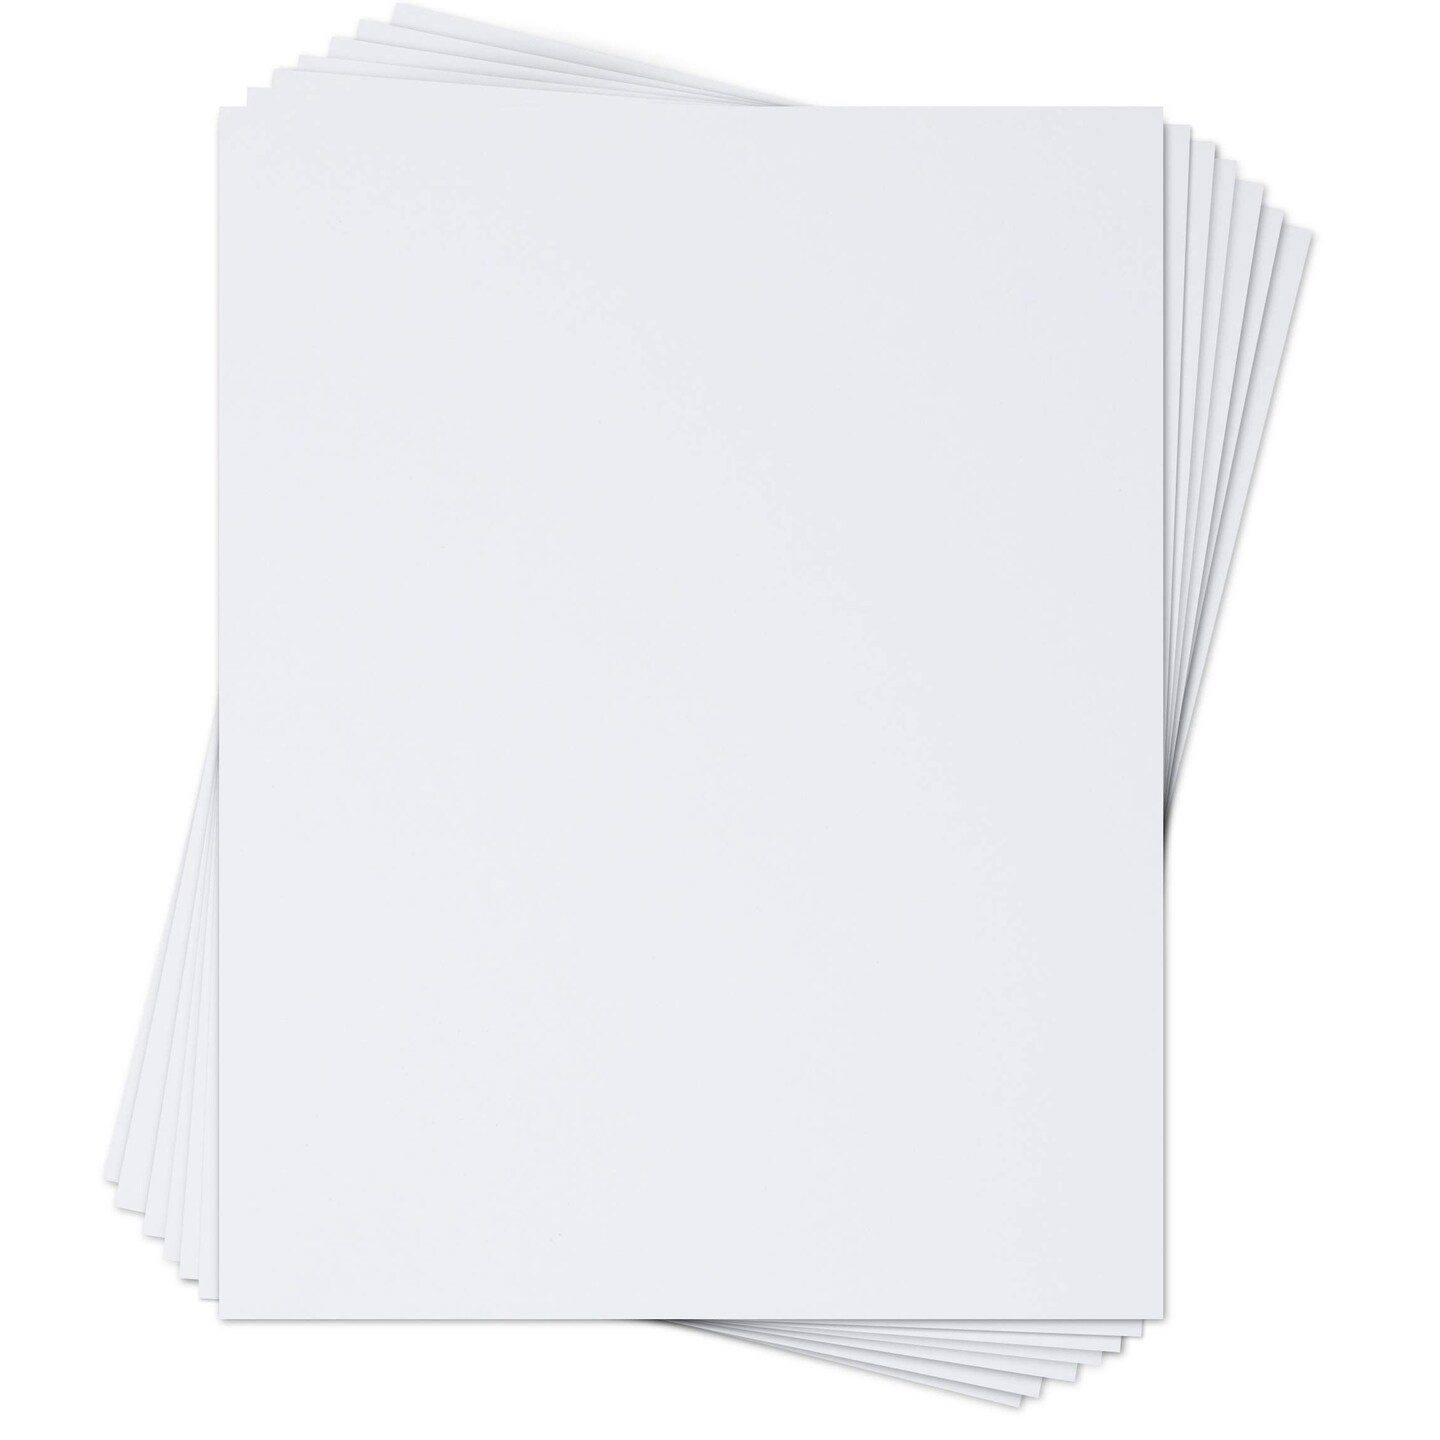 11x14 White Backing Board Backer Boards for Frame Picture Photo DIY Artwork